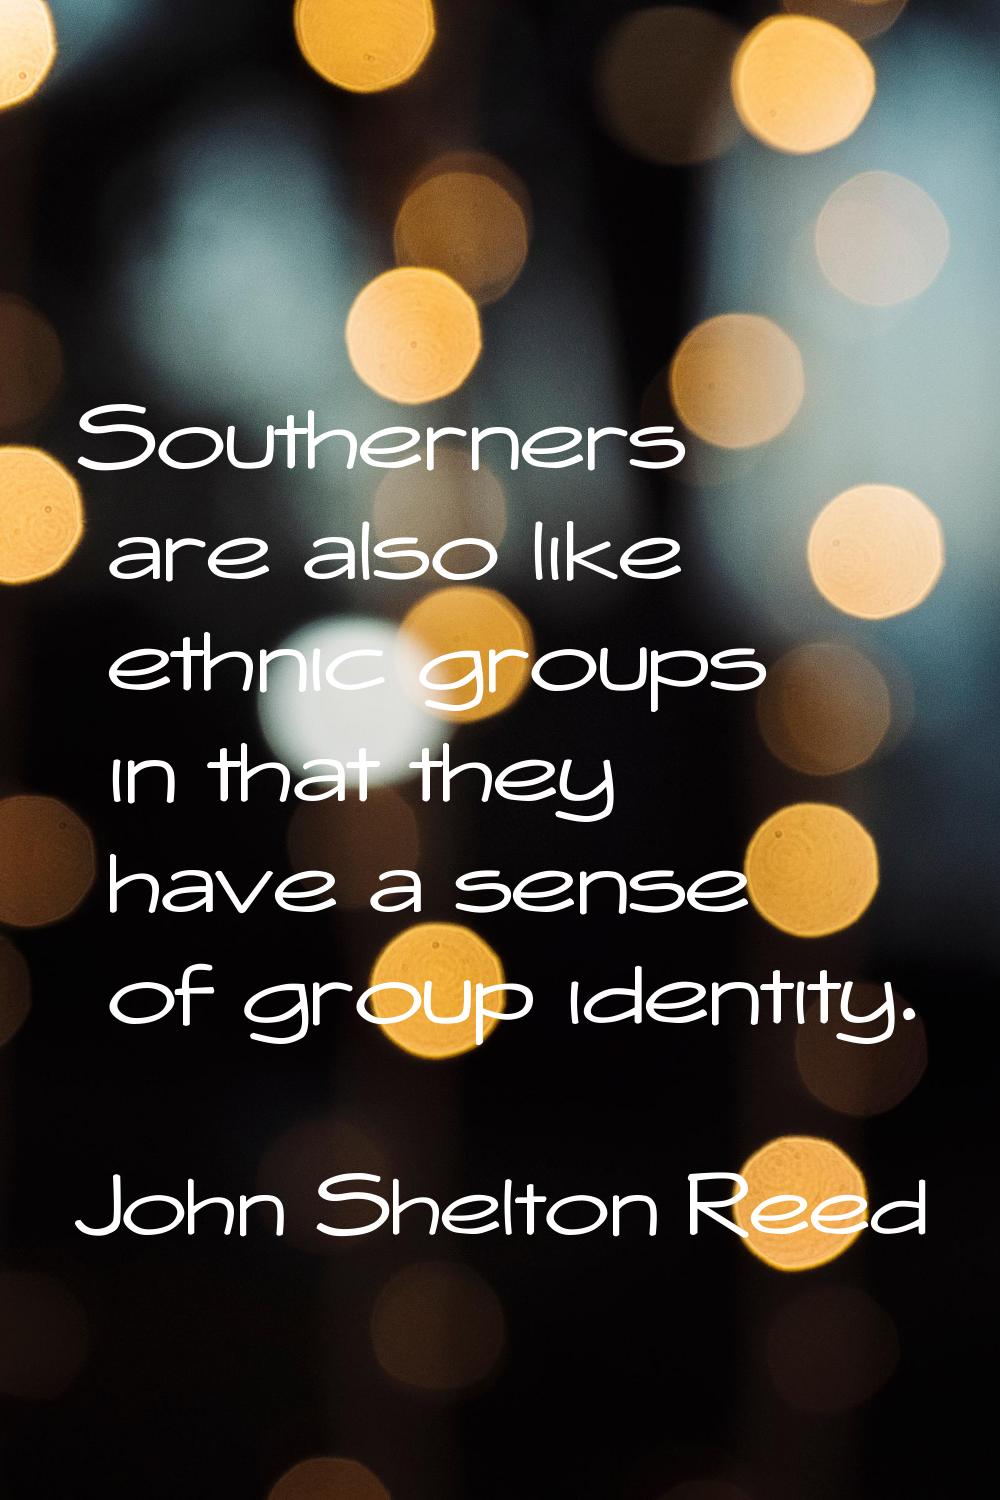 Southerners are also like ethnic groups in that they have a sense of group identity.